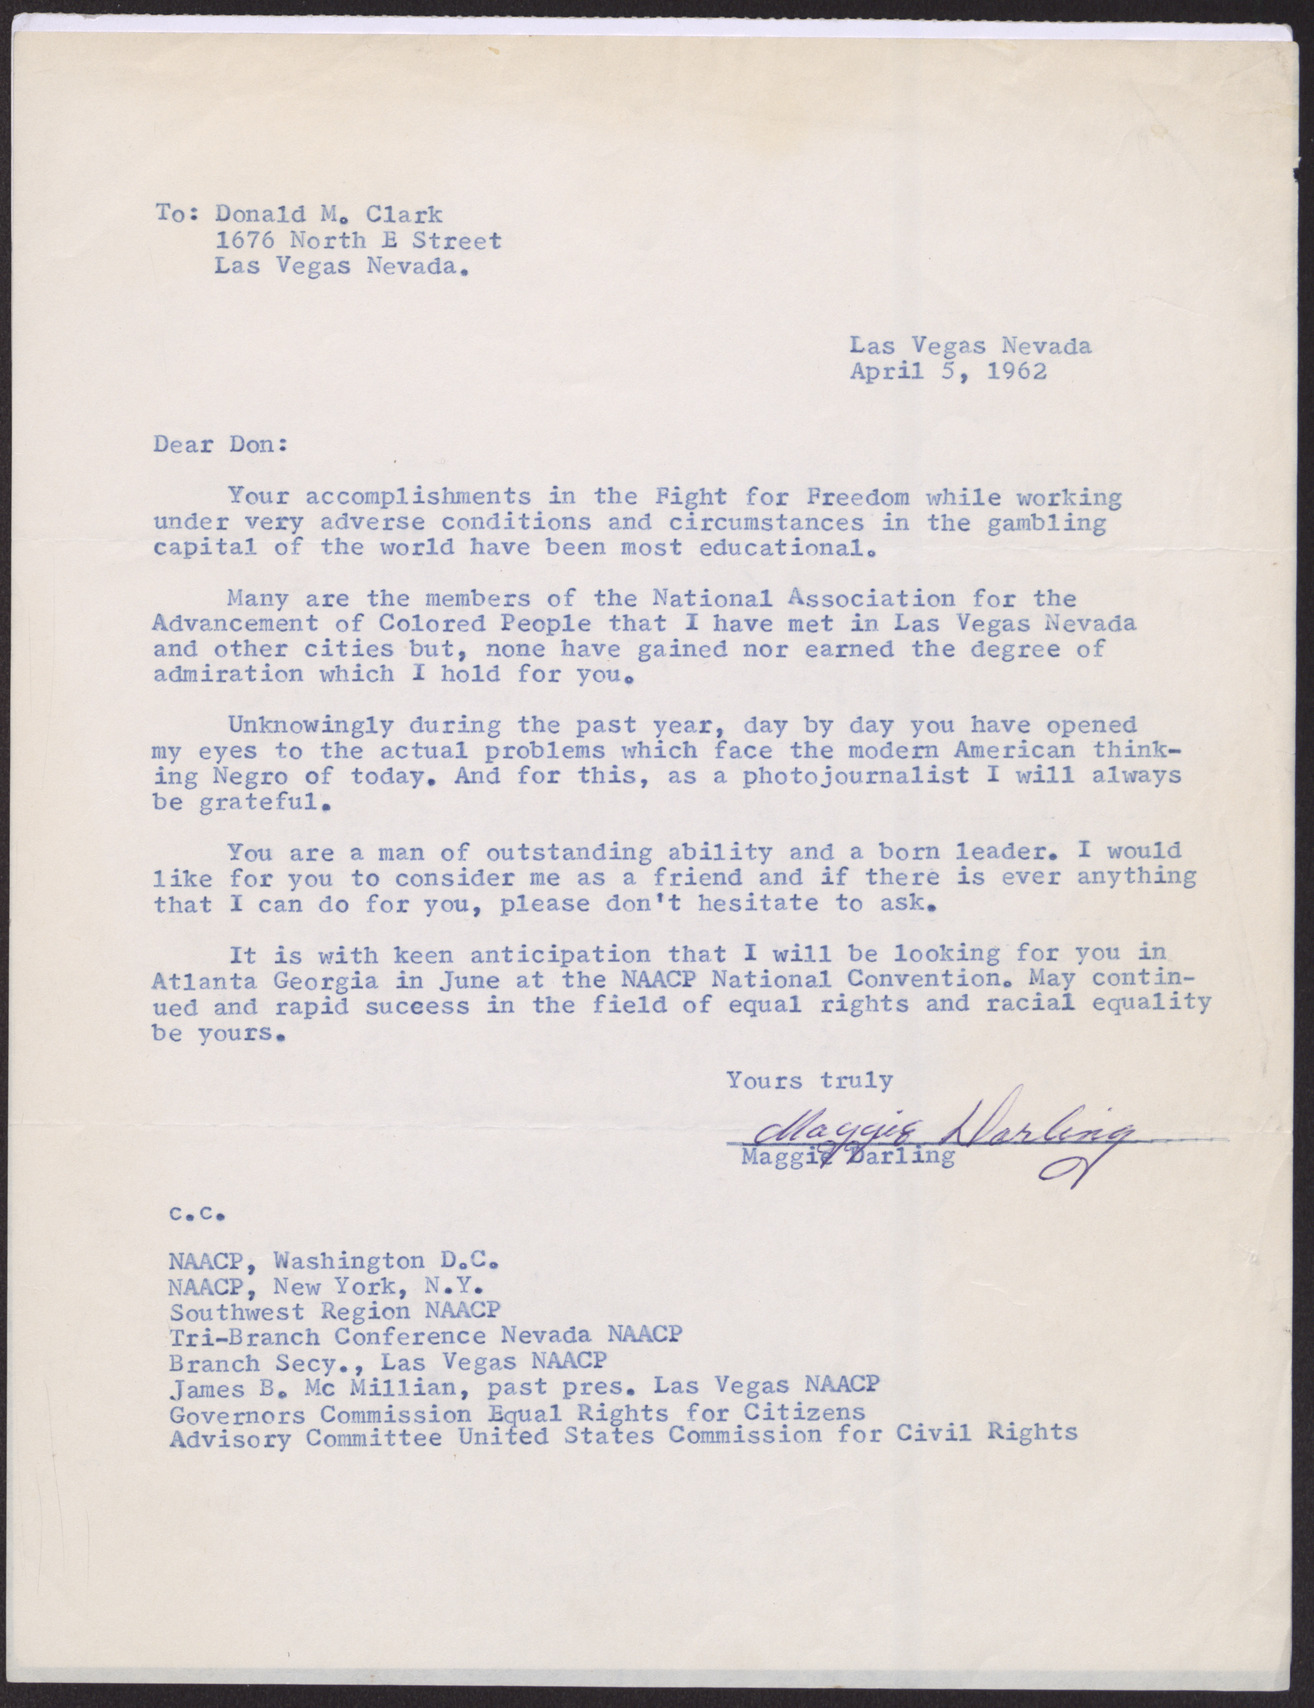 Letter to Donald M. Clark from Maggie Thurnblad, April 5, 1962